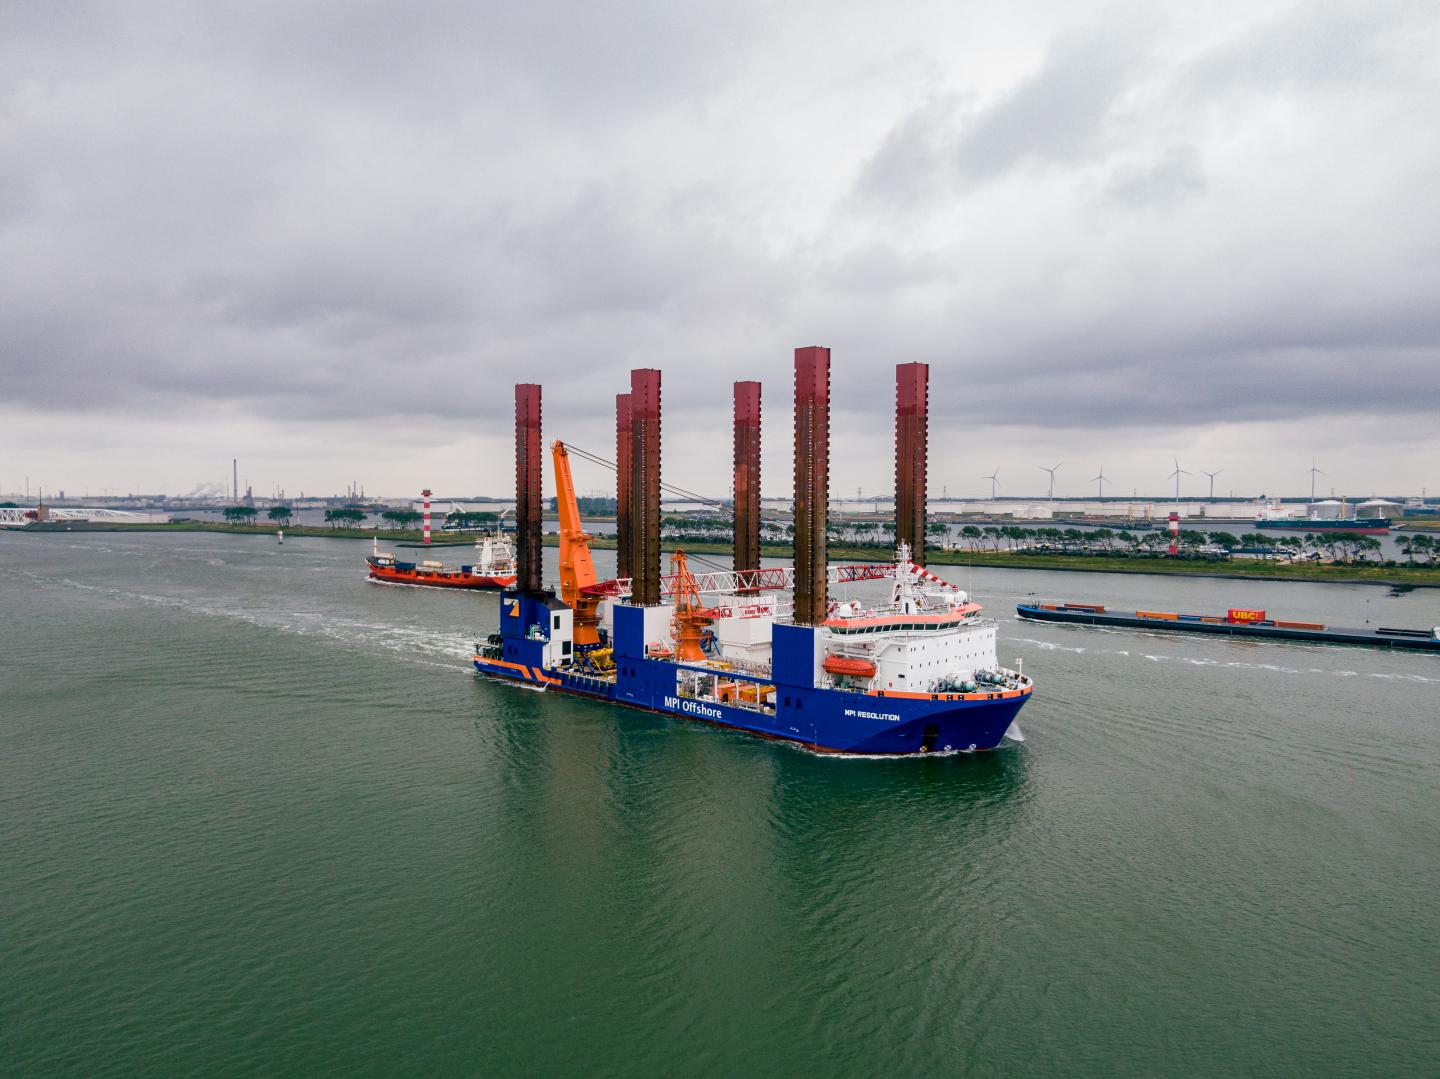 Van Oord to install Italy’s first Offshore Wind Farm